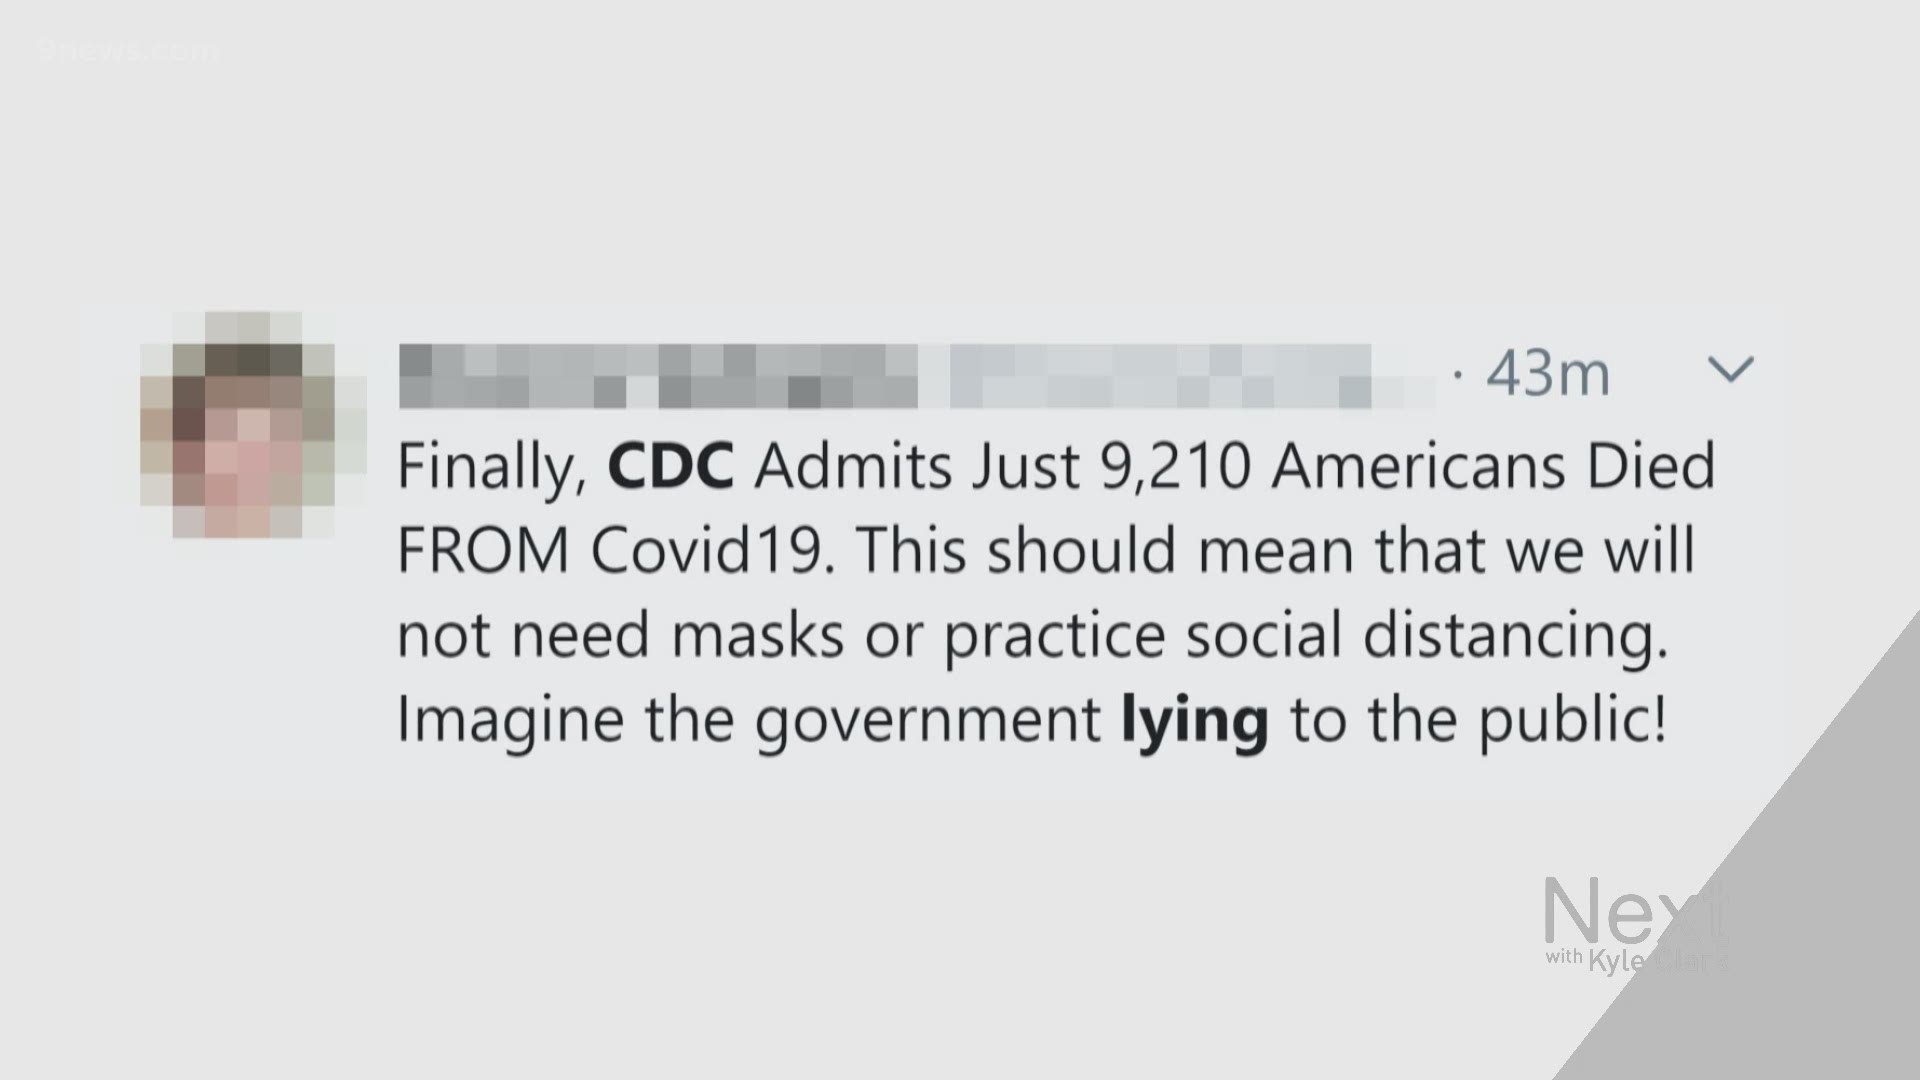 It's a claim that says the CDC admits to overblowing the coronavirus pandemic. Dr. Leon Kelly says it misrepresents the truth about COVID-19 deaths.